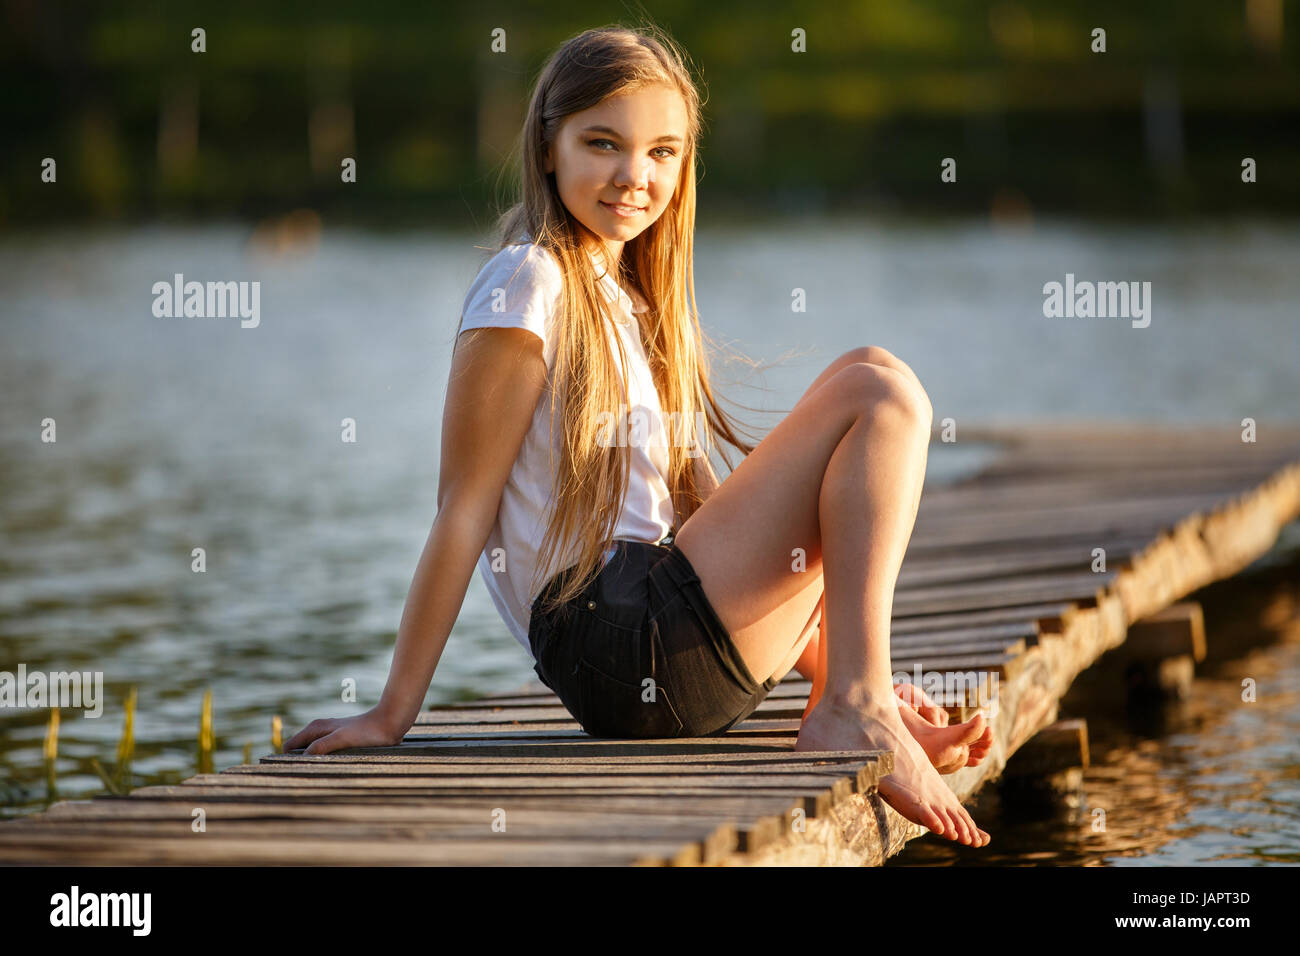 Young smiling girl sitting on pier near pond in sunset beams Stock Photo